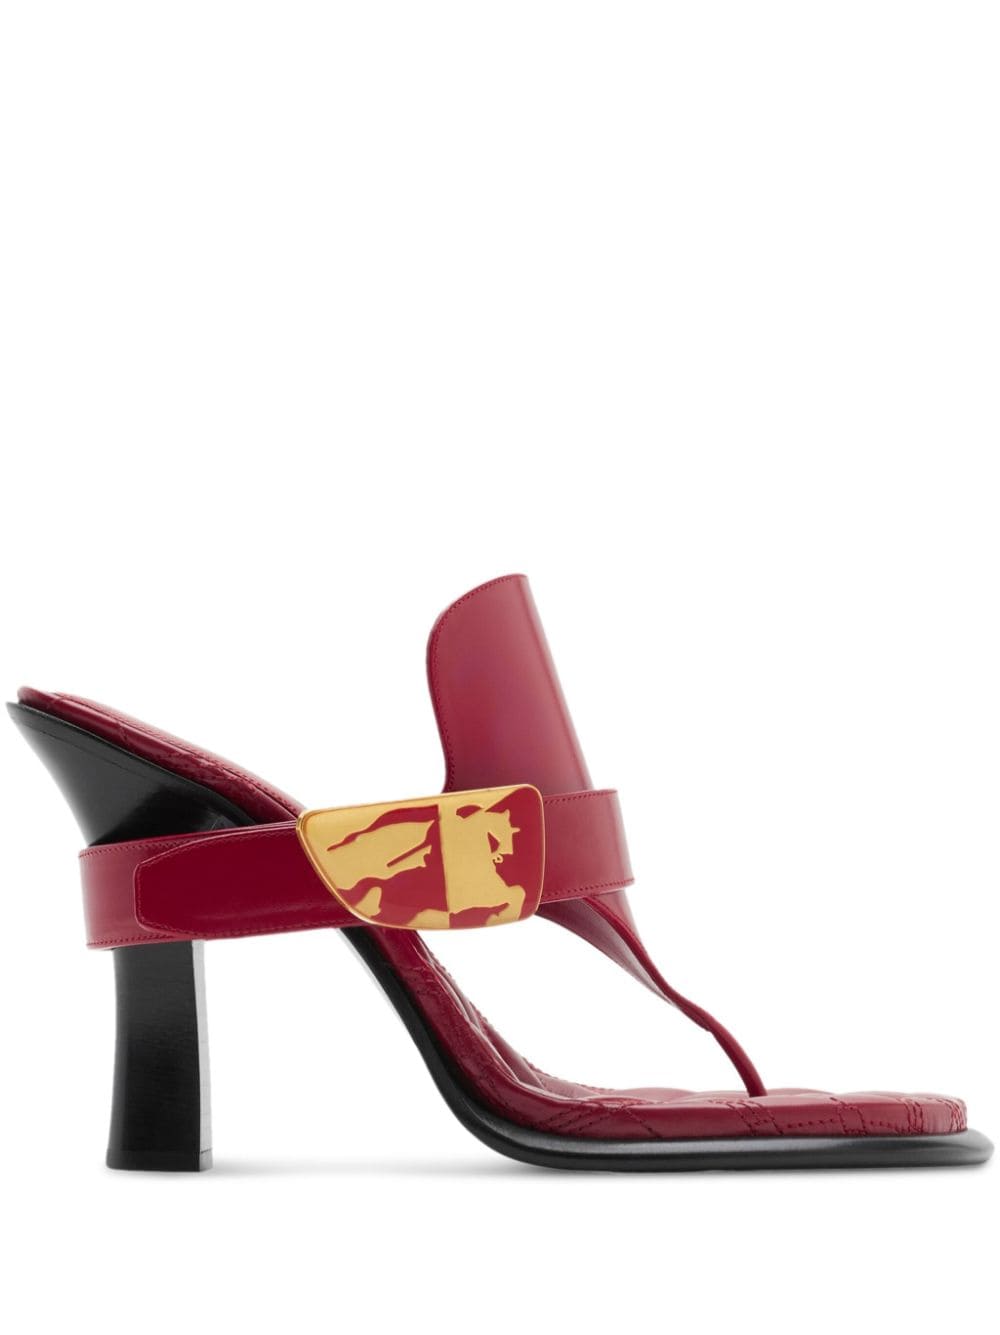 Burberry Bay leather sandals - Red von Burberry